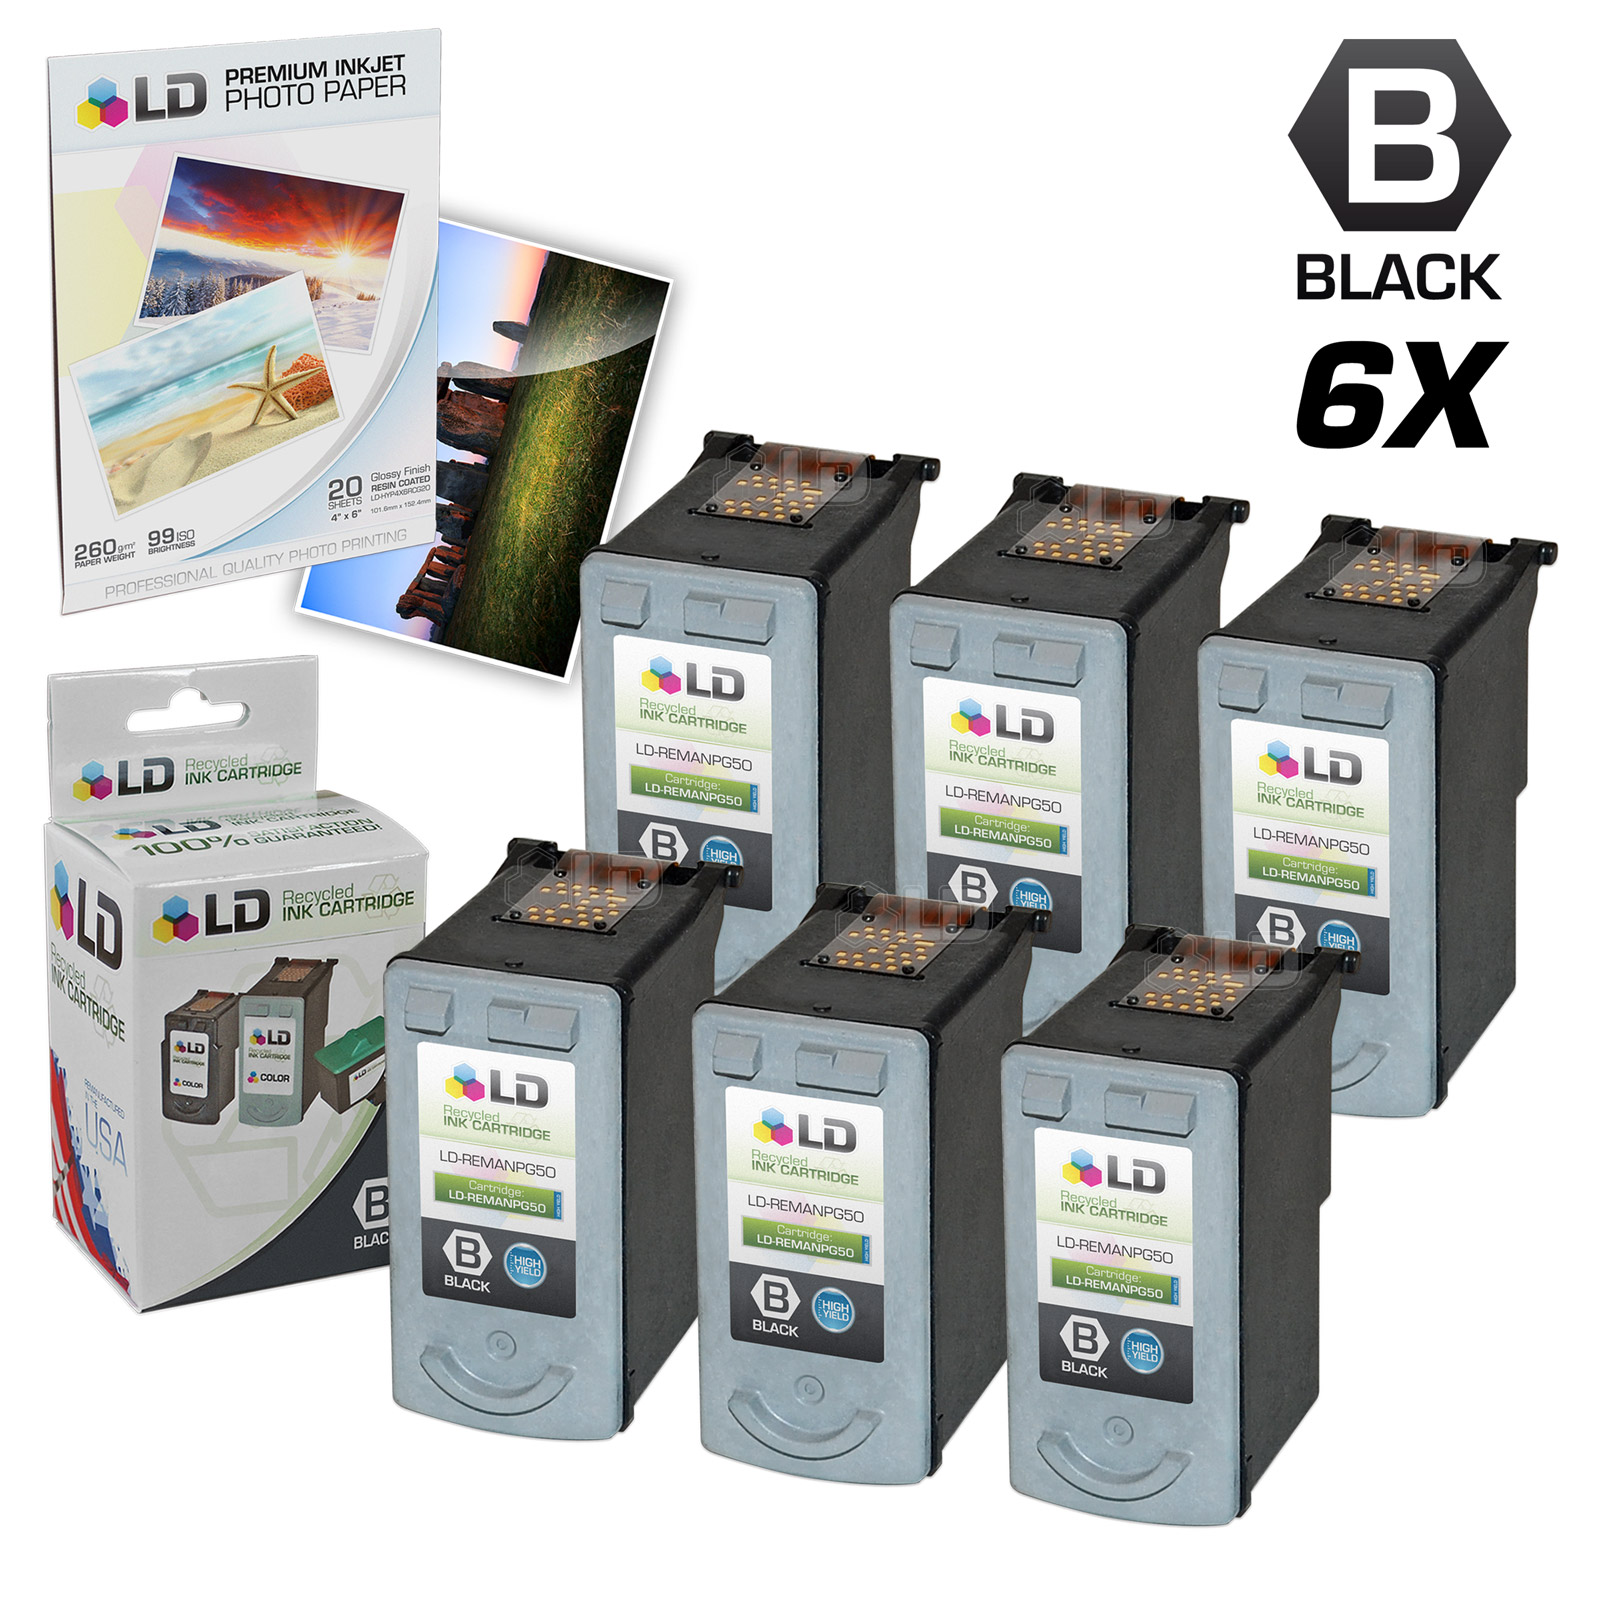 LD Remanufactured Cartridge Replacement for Canon PG50 High Capacity (Pigment Black, 6-Pack) - image 1 of 1